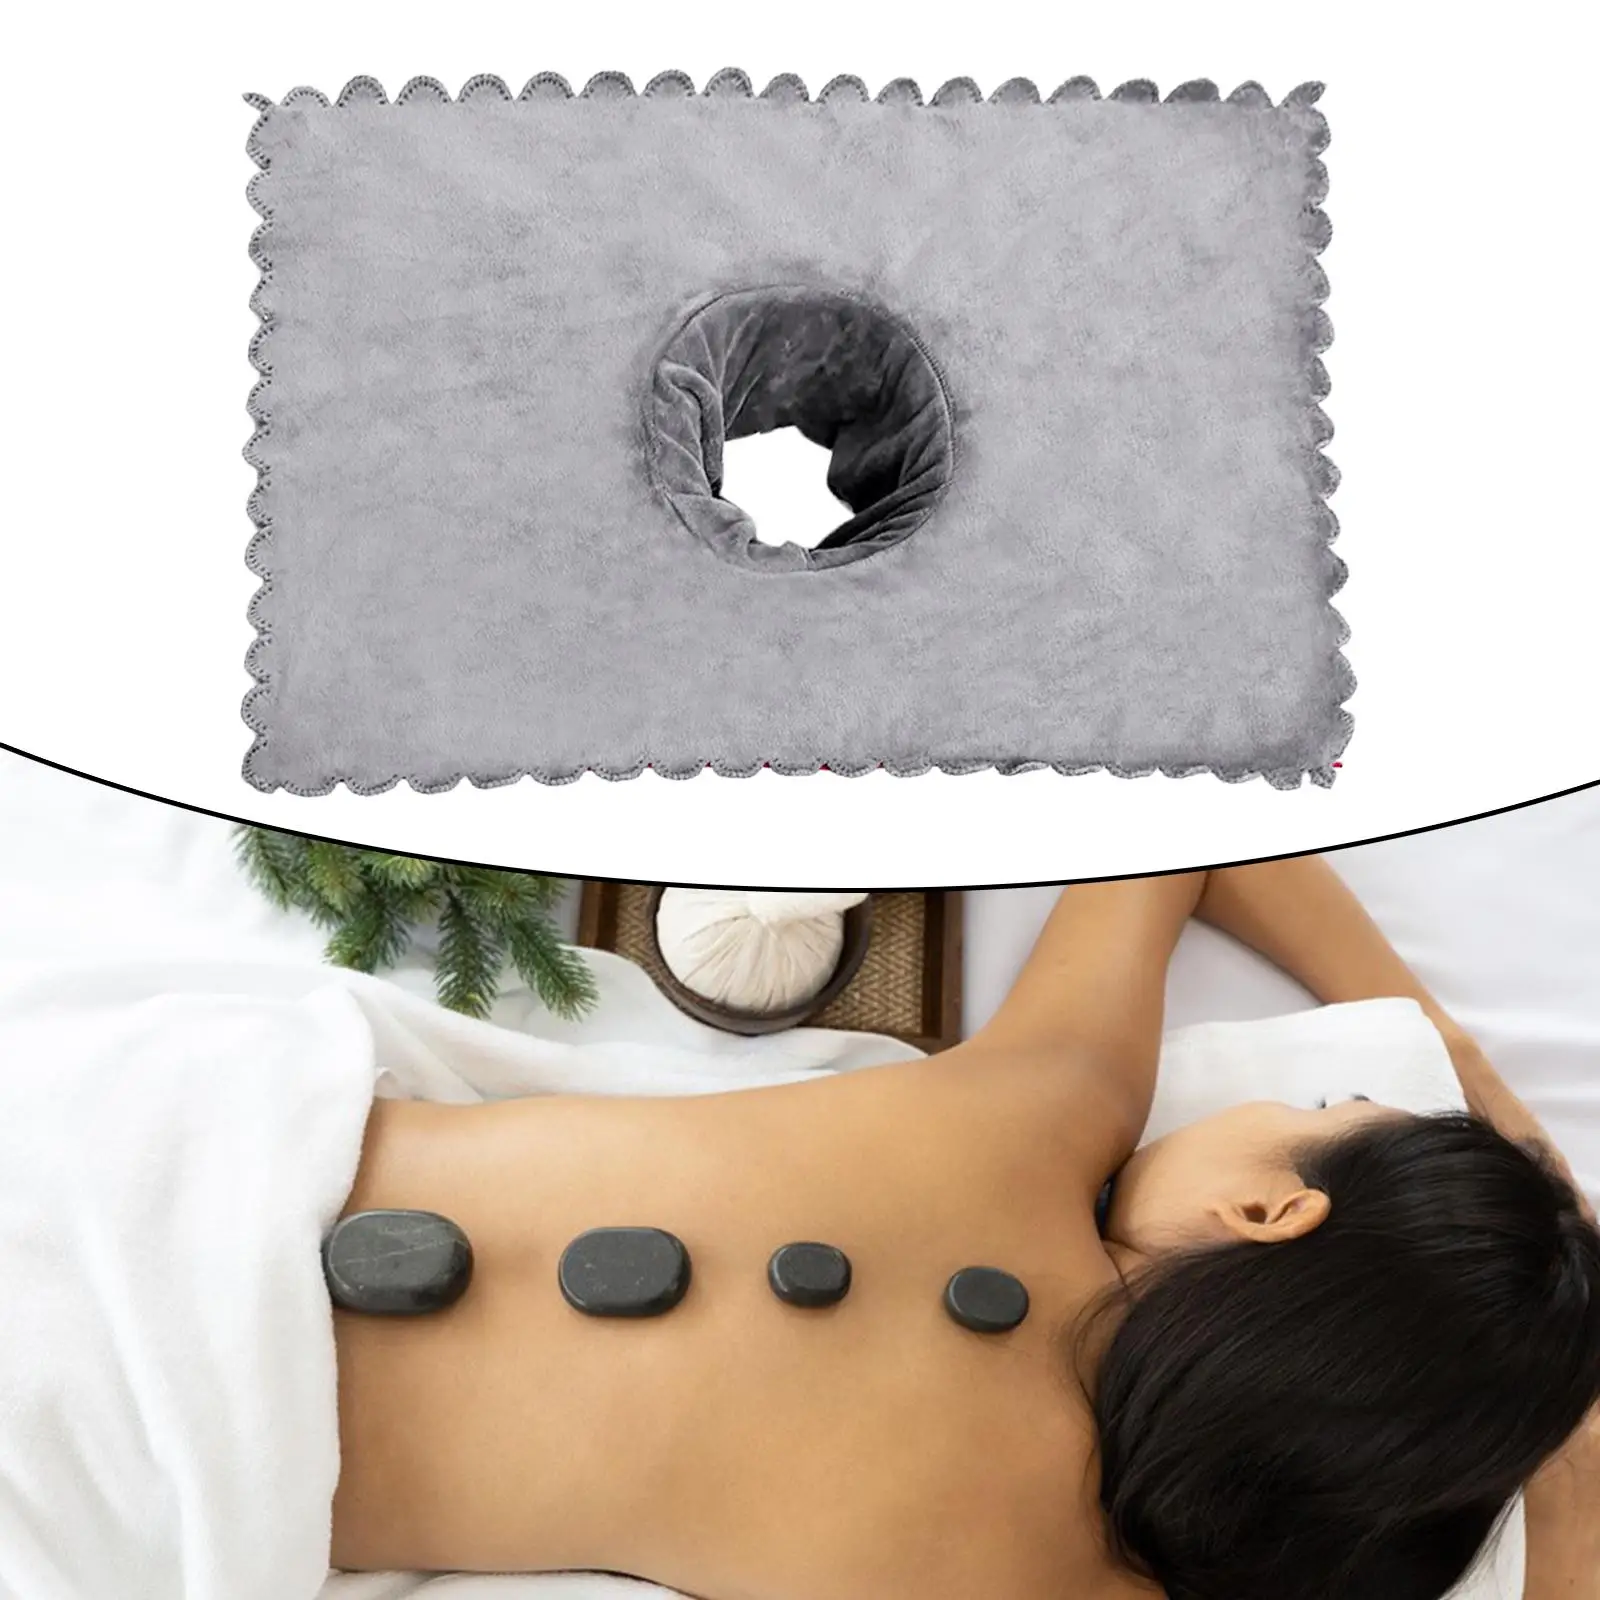 Massage Table Sheet Covers with Face Hole Sectional Towelling for Beauty Salon